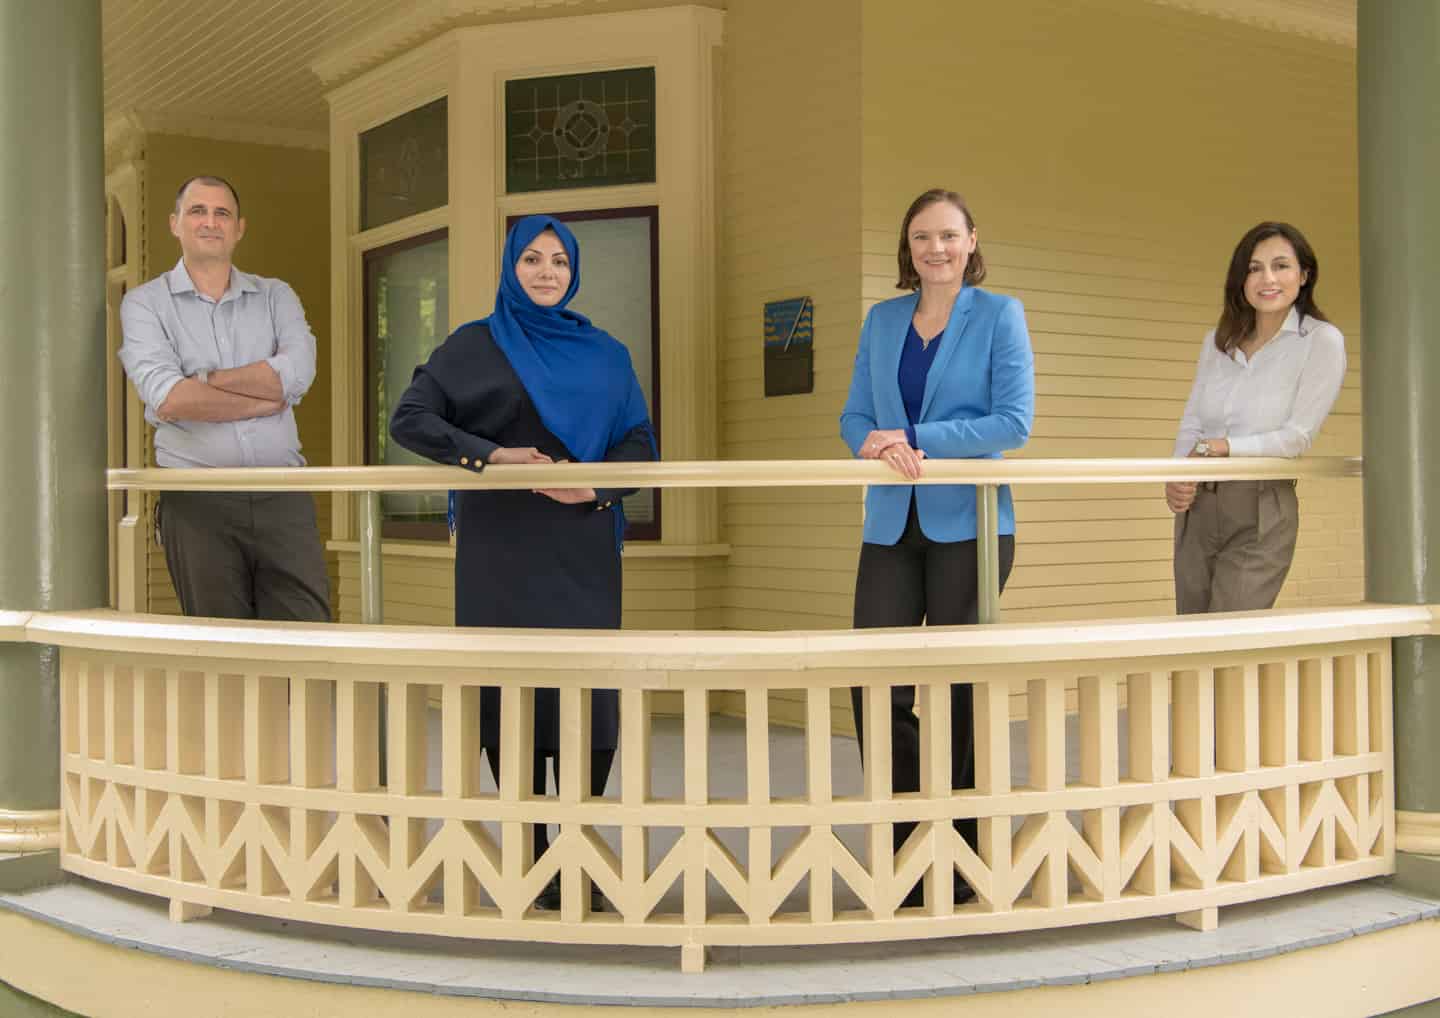 Image of (L-R) Dr. Gerry Veenstra, Dr. Zeinab Hosseini, Dr. Annalijn Conklin and Dr. Nadia Khan